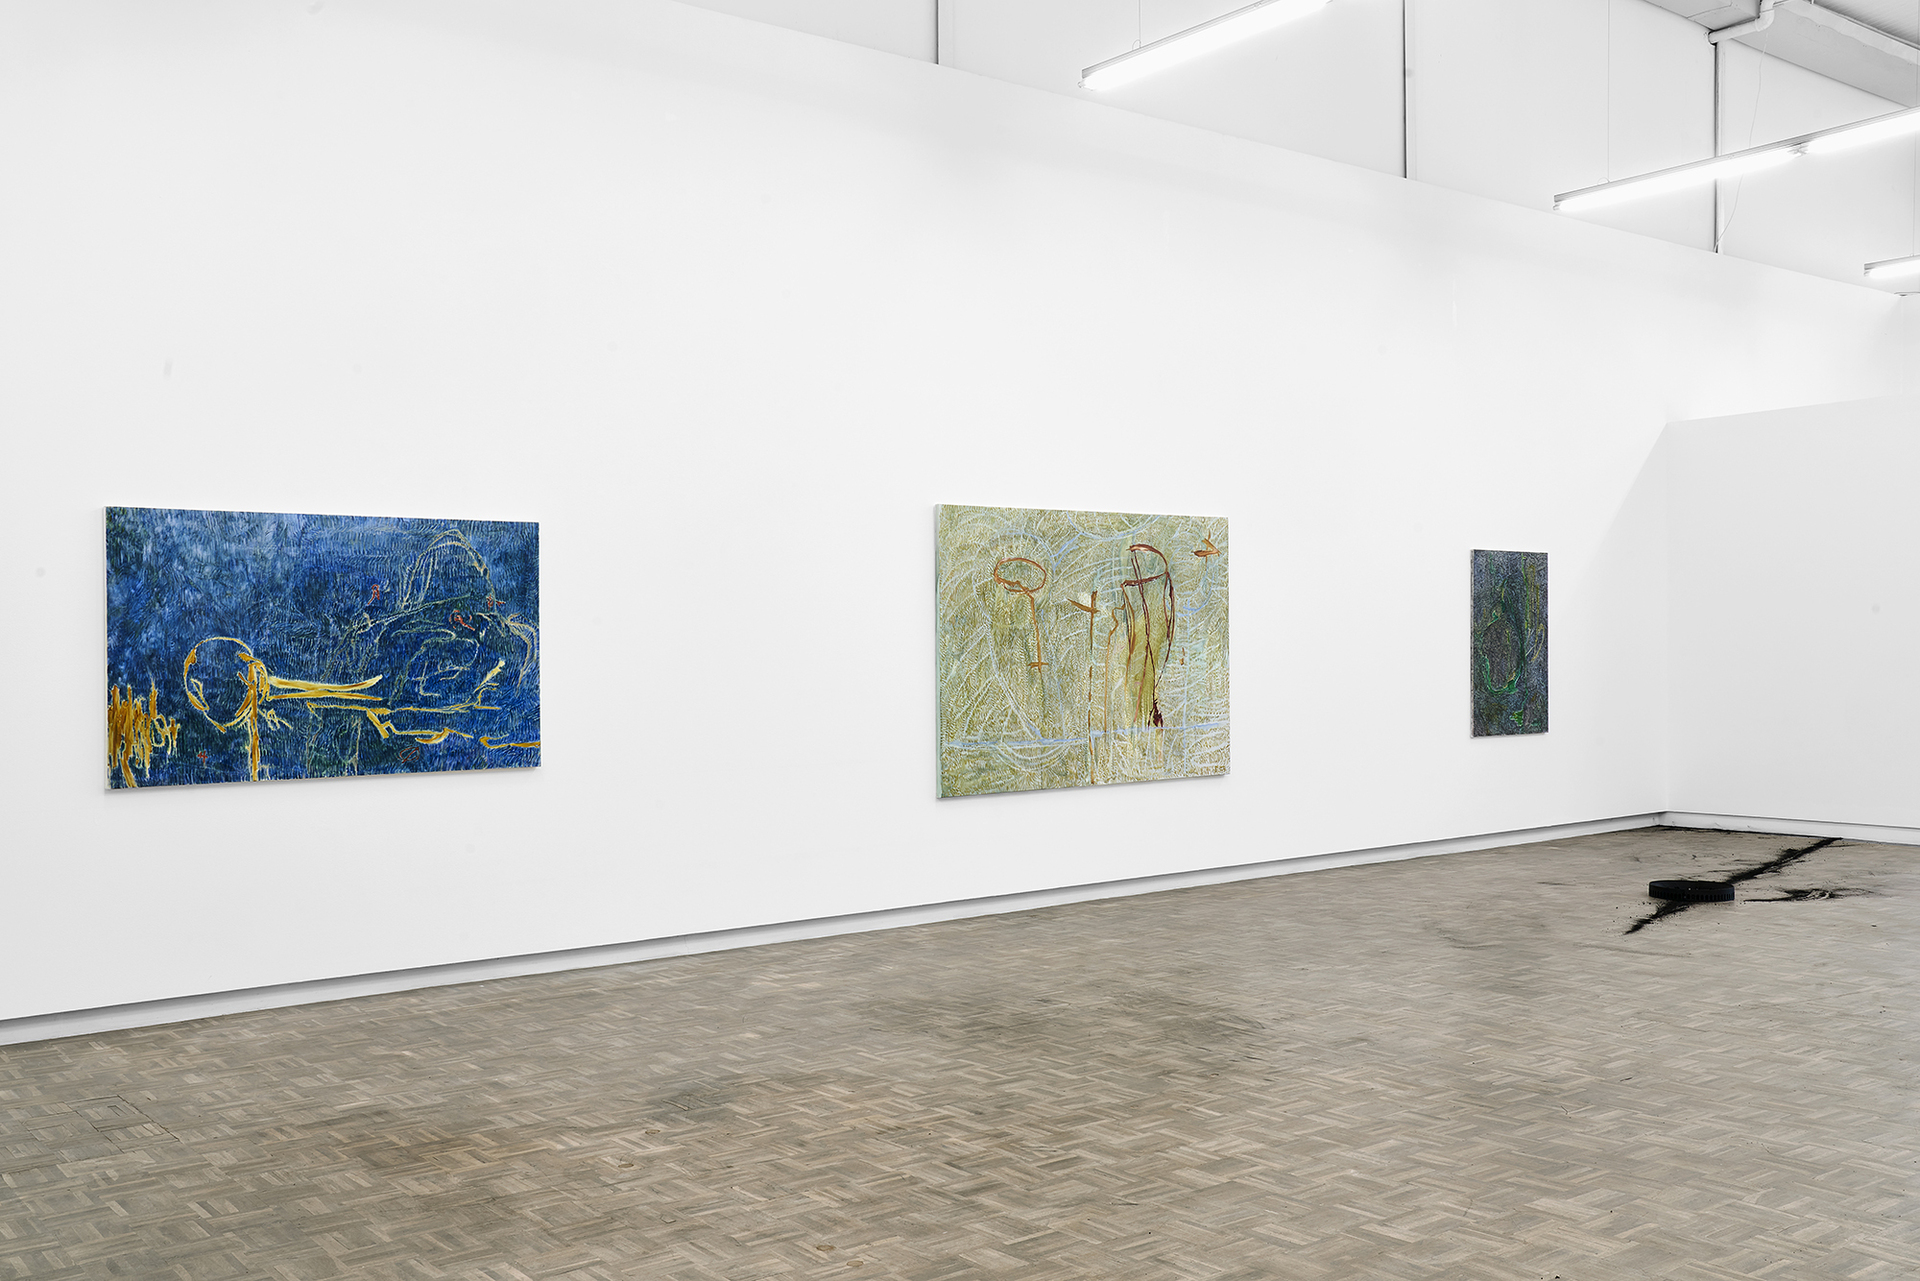 Achraf Touloub, 'Vies paralleles', 2022 | Installation view at blank projects, Cape Town (6)